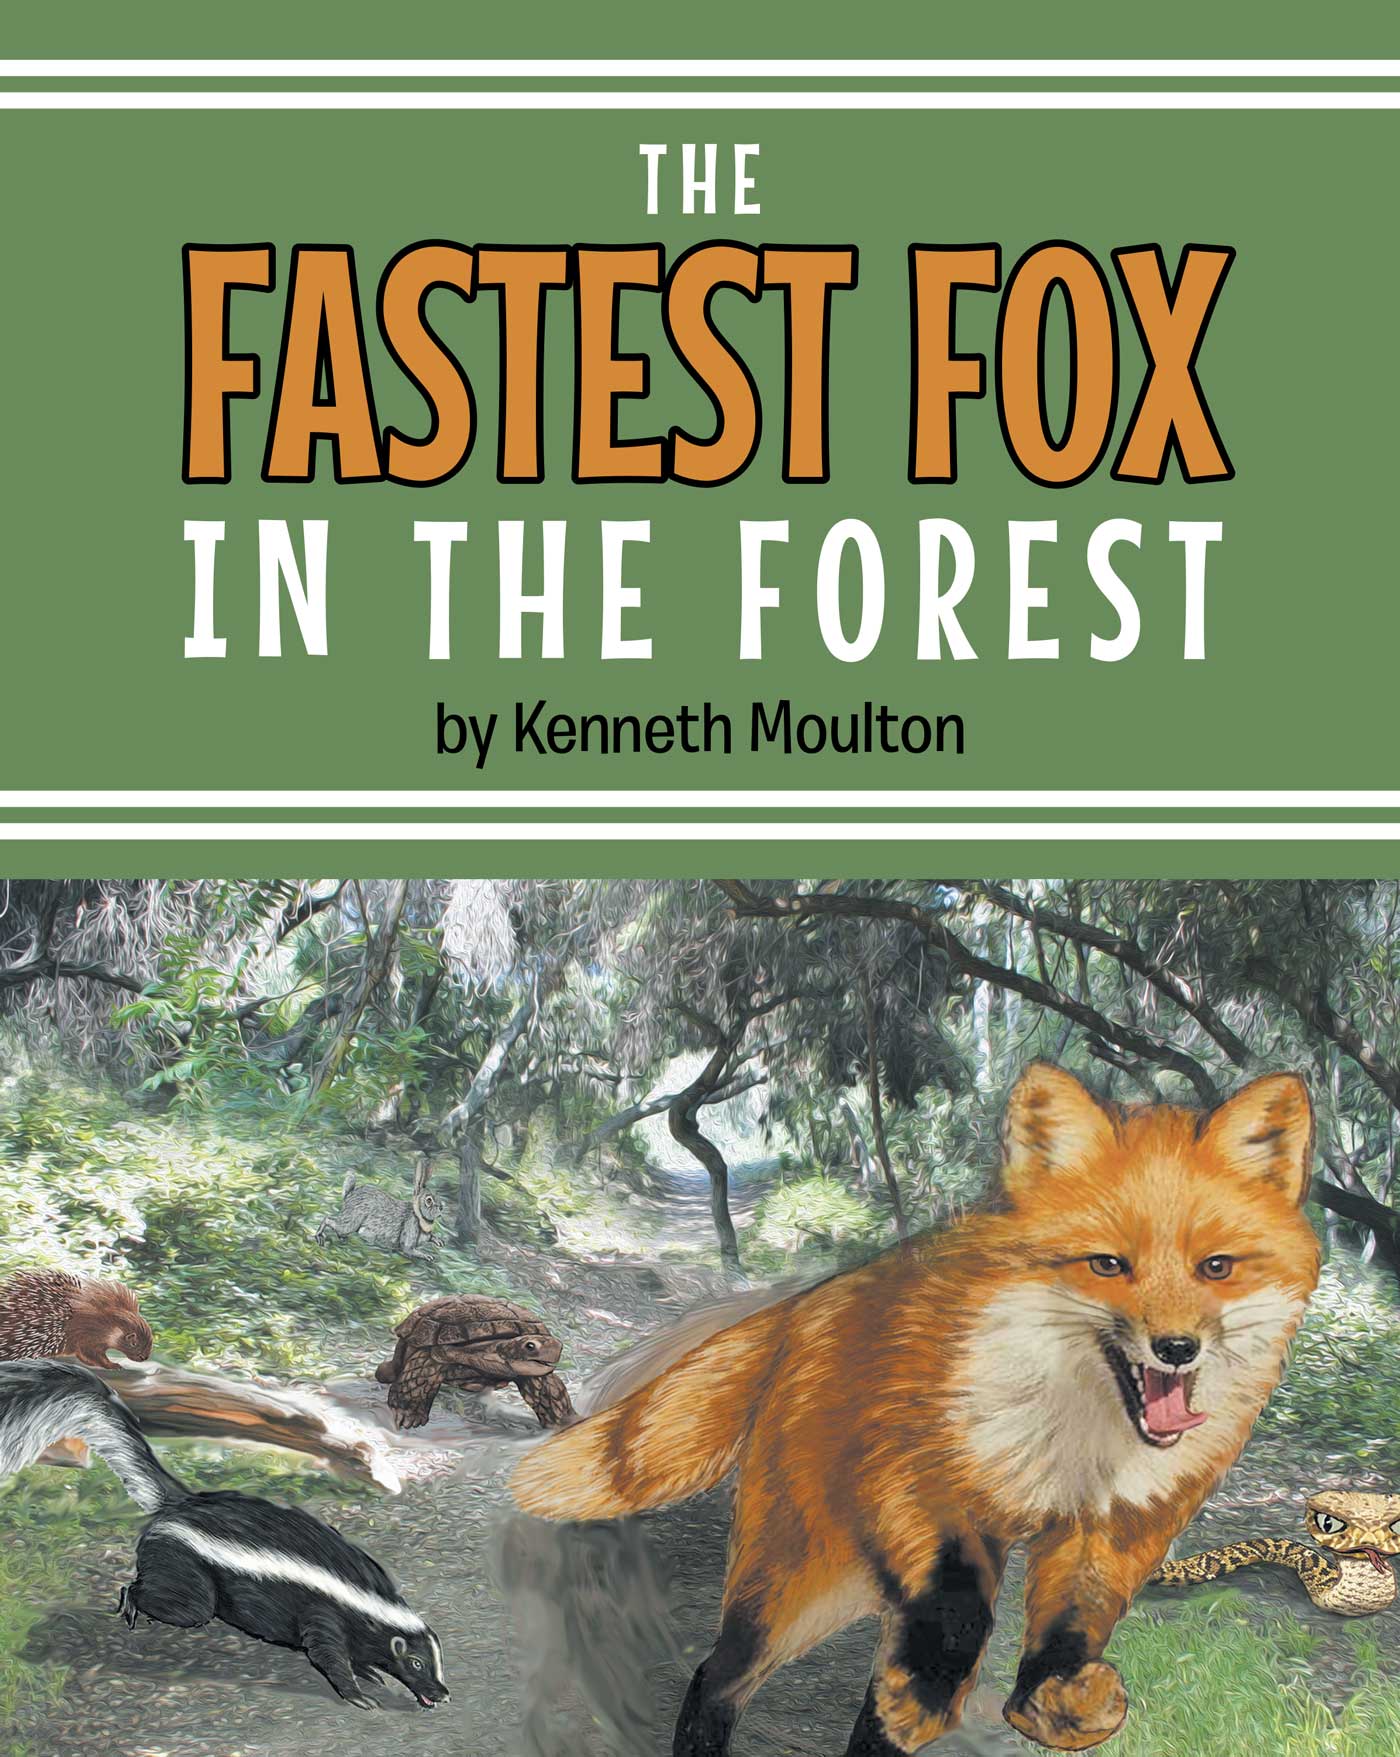 Kenneth Moulton’s new book “The Fastest Fox in the Forest” is a fun and ...